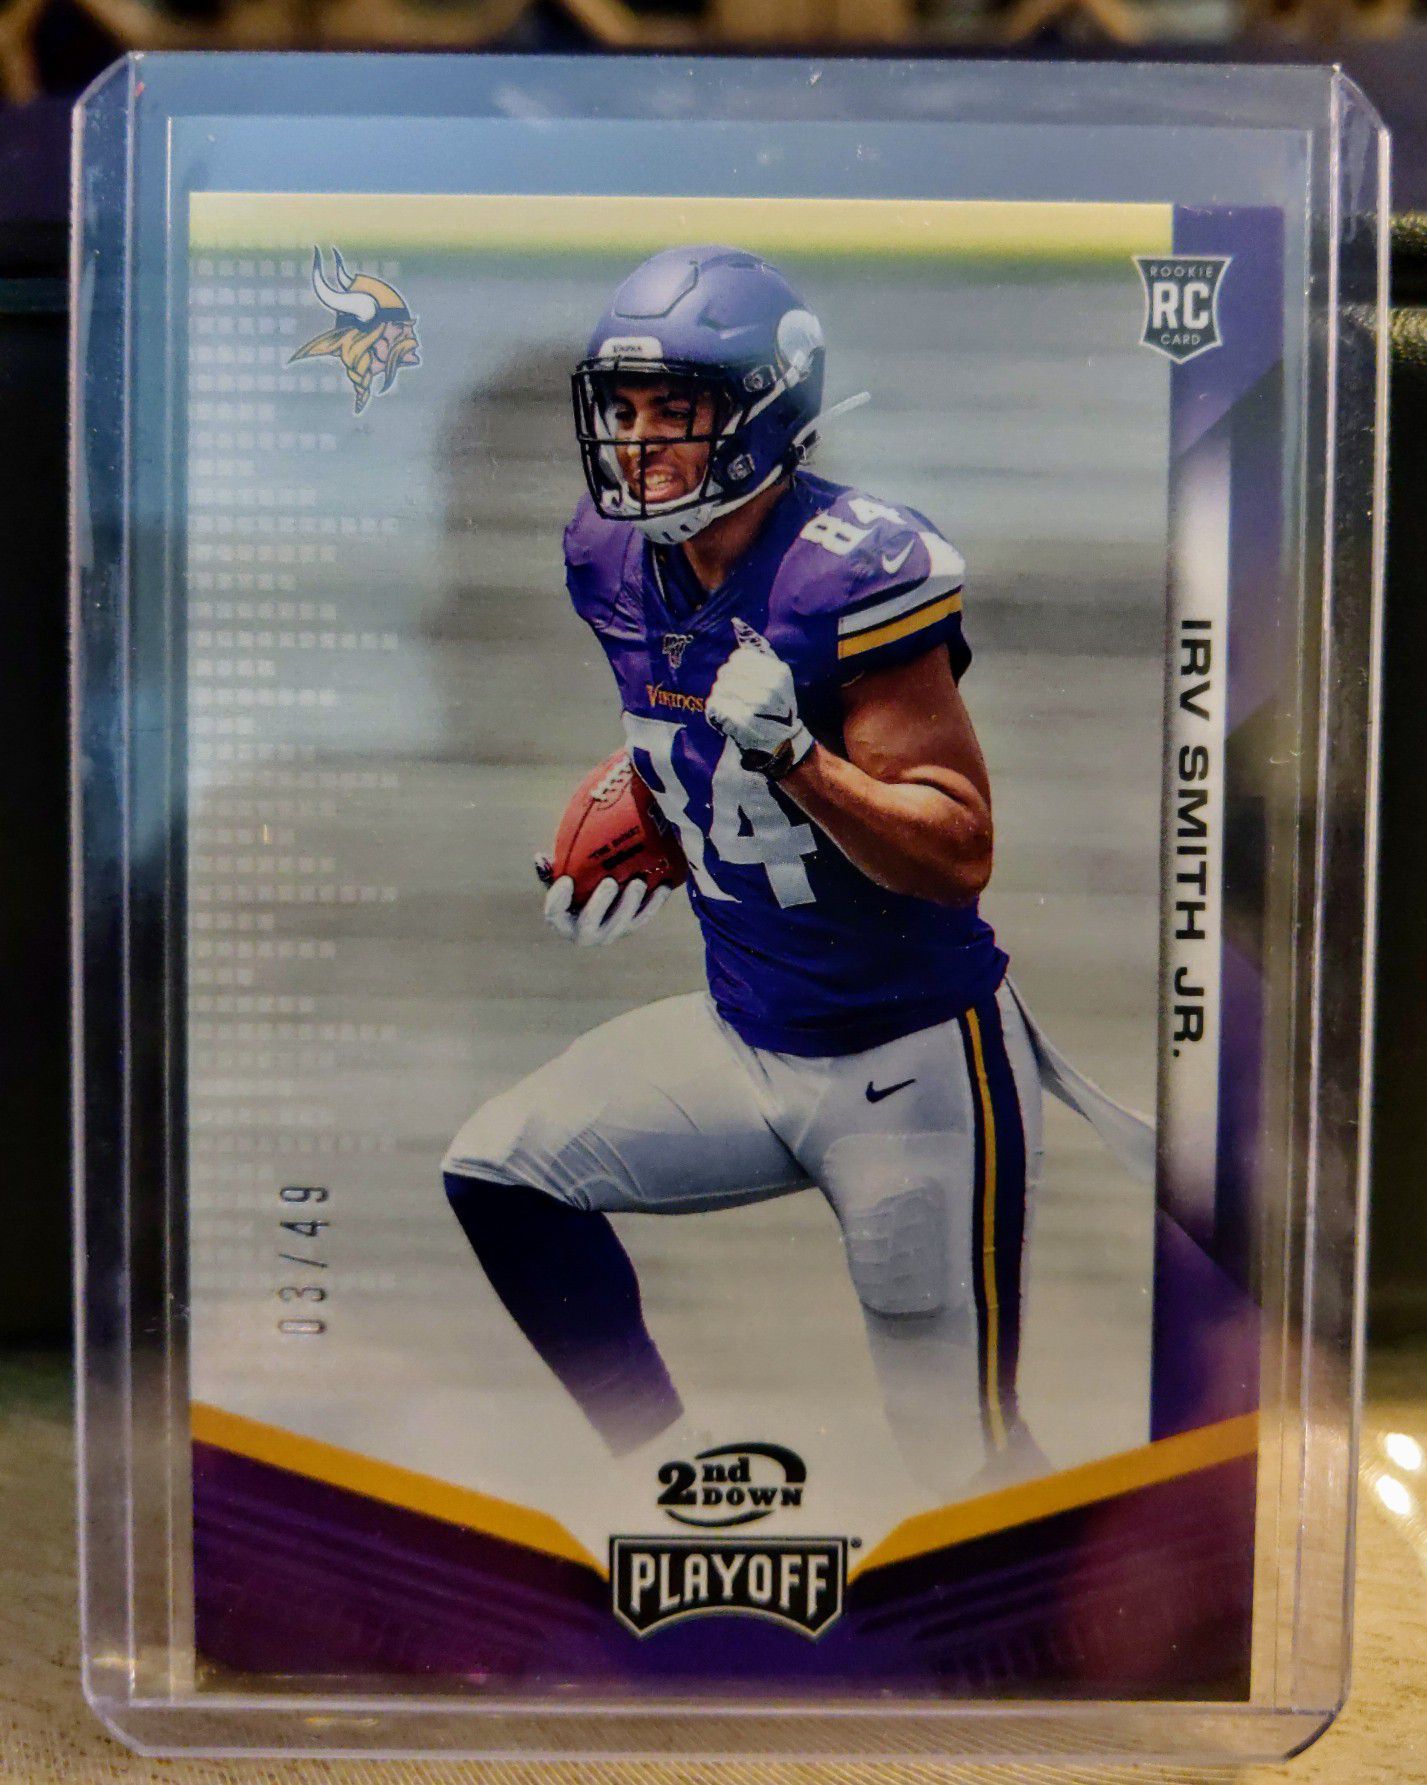 Ive Smith Jr. - 2019 Playoff 2nd Down RC #03/49